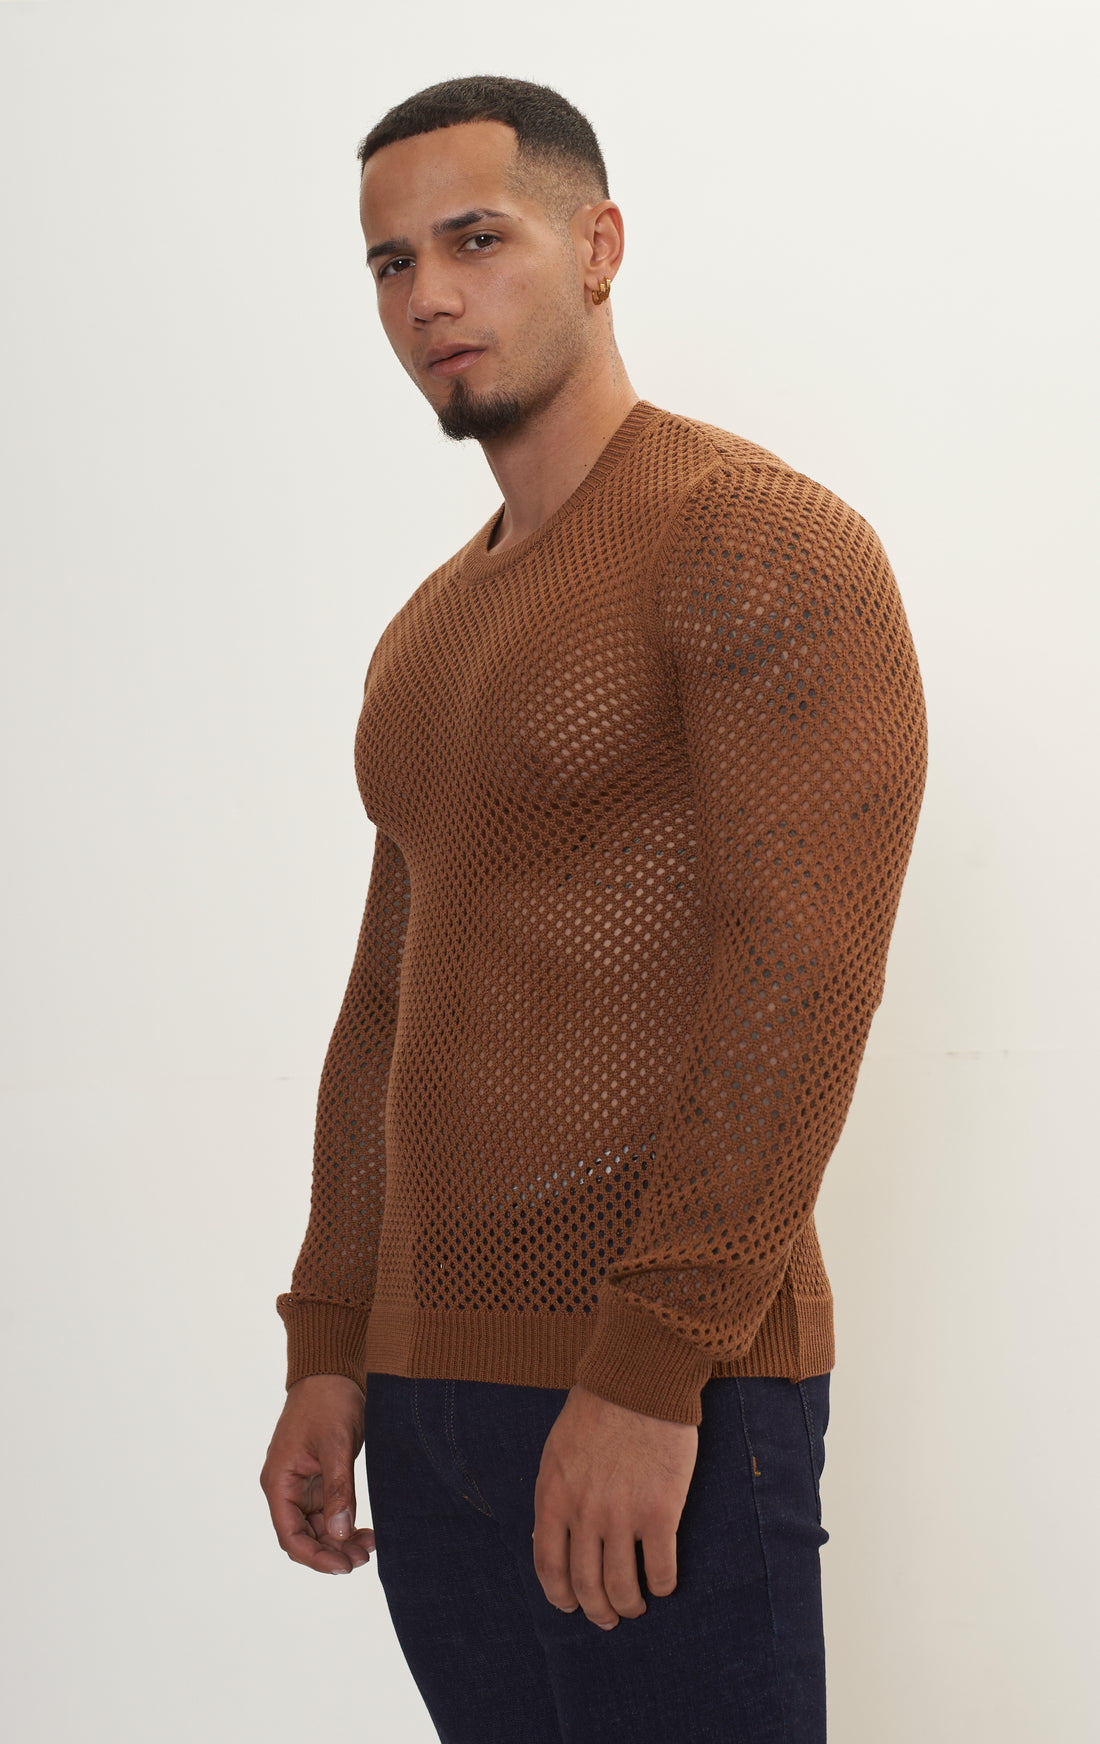 See Through Fishnet Muscle Fit Shirt - Light Brown